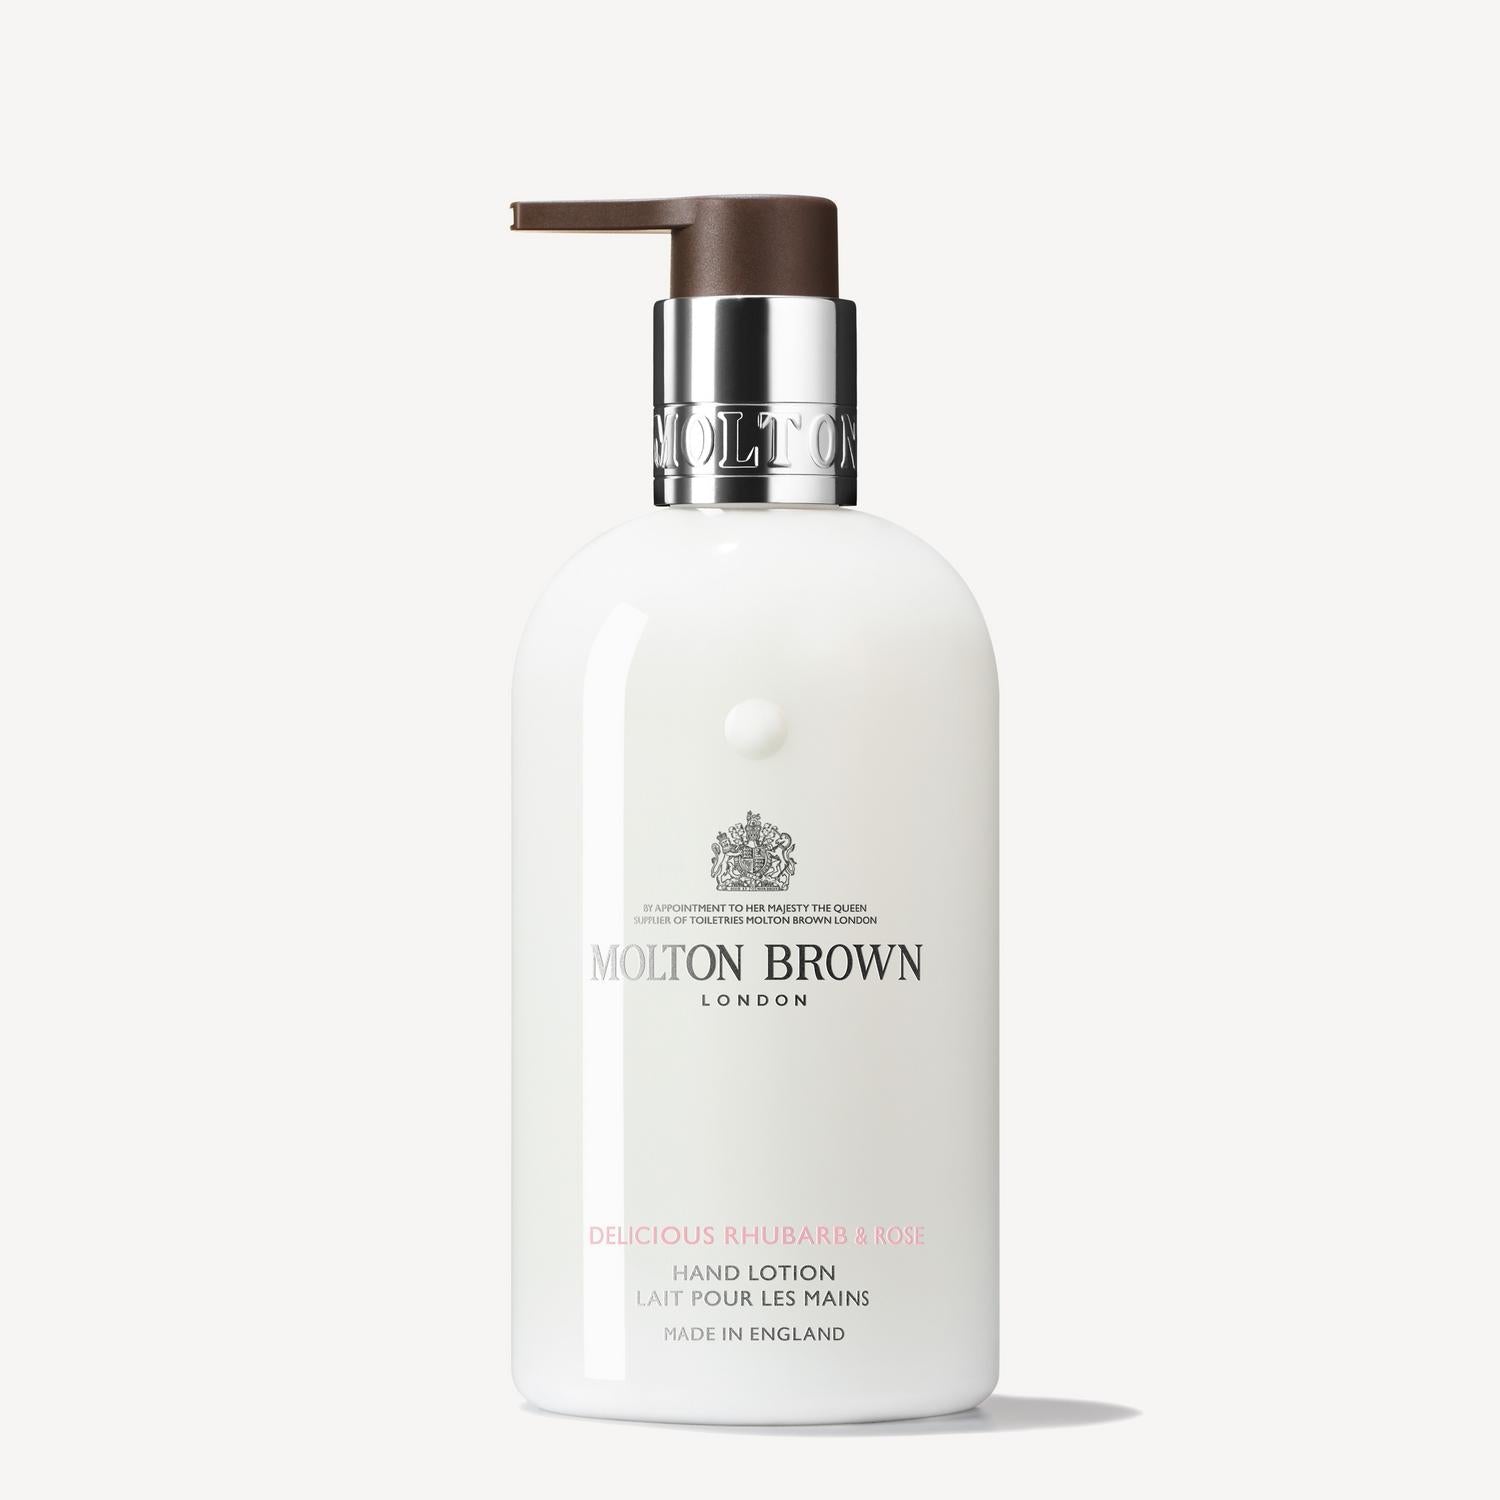 Molton Brown Delicious Rhubarb & Rose Hand Lotion - 300ml